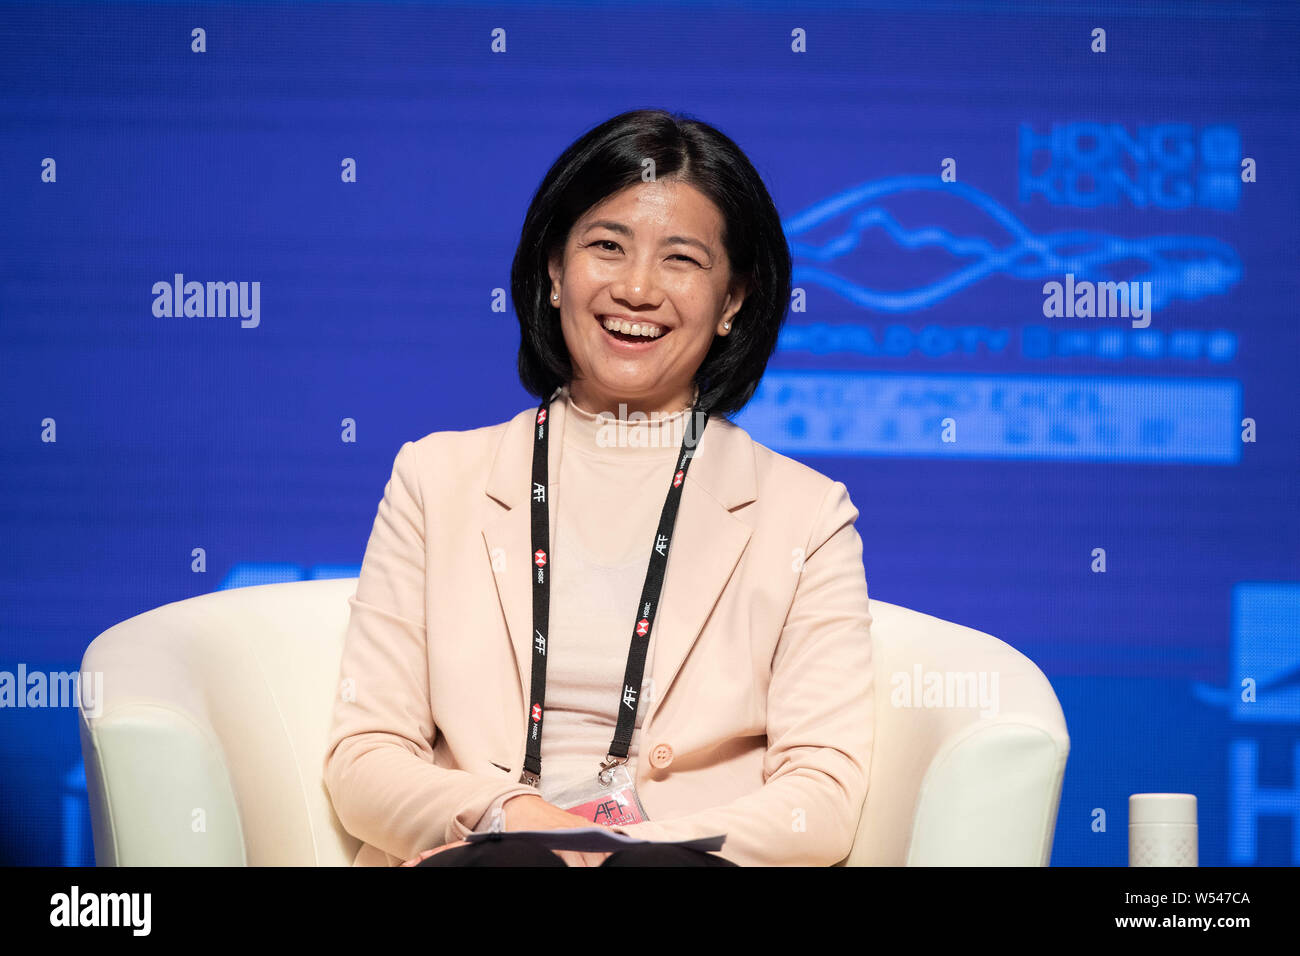 Liang Yingyu, Managing Partner di Qiming Weichuang Venture Capital Management (Shanghai) Company Limited, assiste il dodicesimo Asian Forum finanziario (AFF) Foto Stock